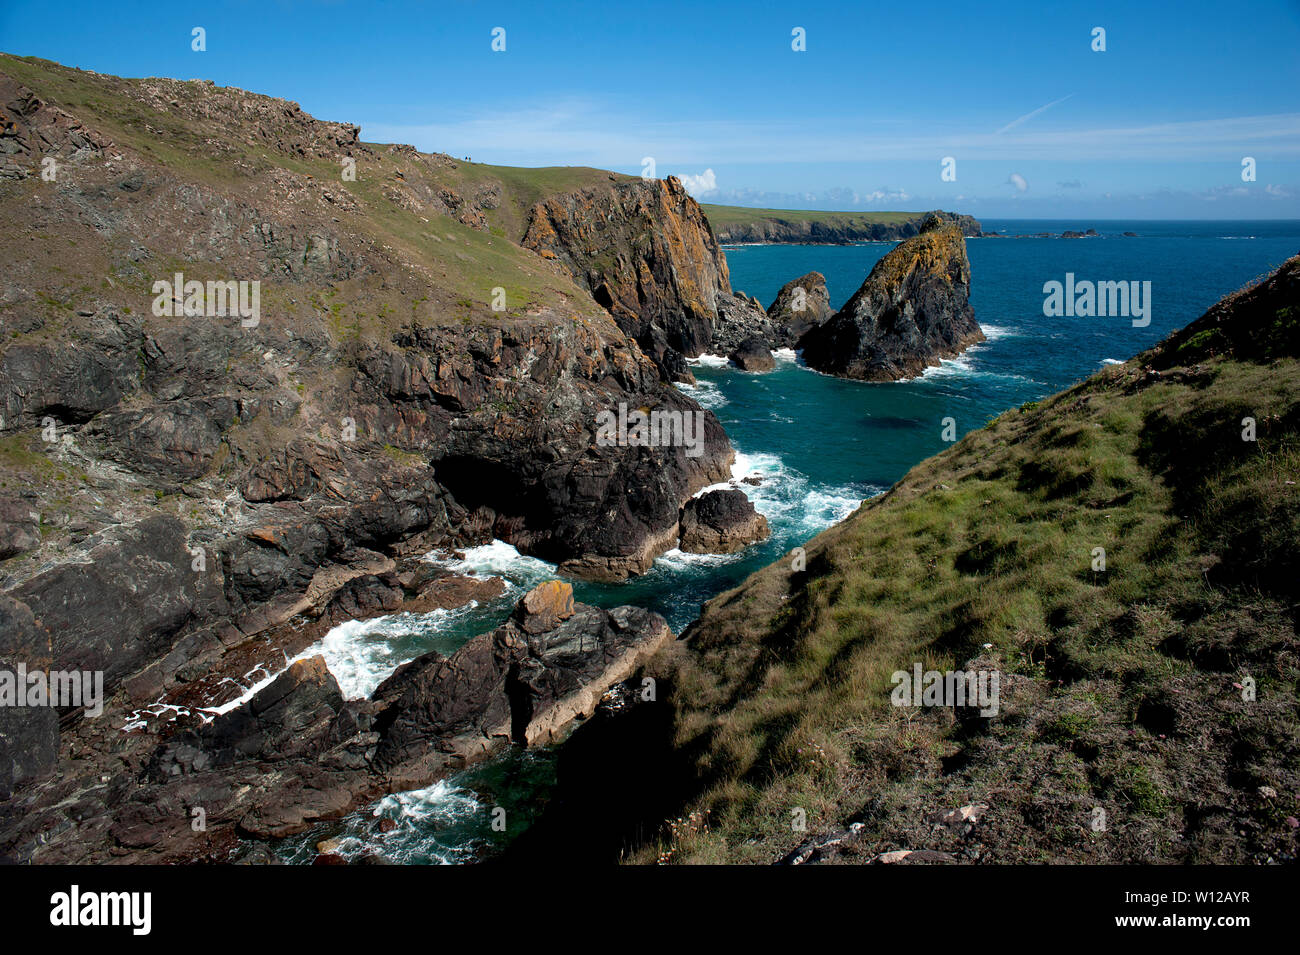 Kynance Cove, Cornwall, England, 2019. The dramatic coastline at the popular holiday destination of Kynance Cove in Cornwall, England. Stock Photo